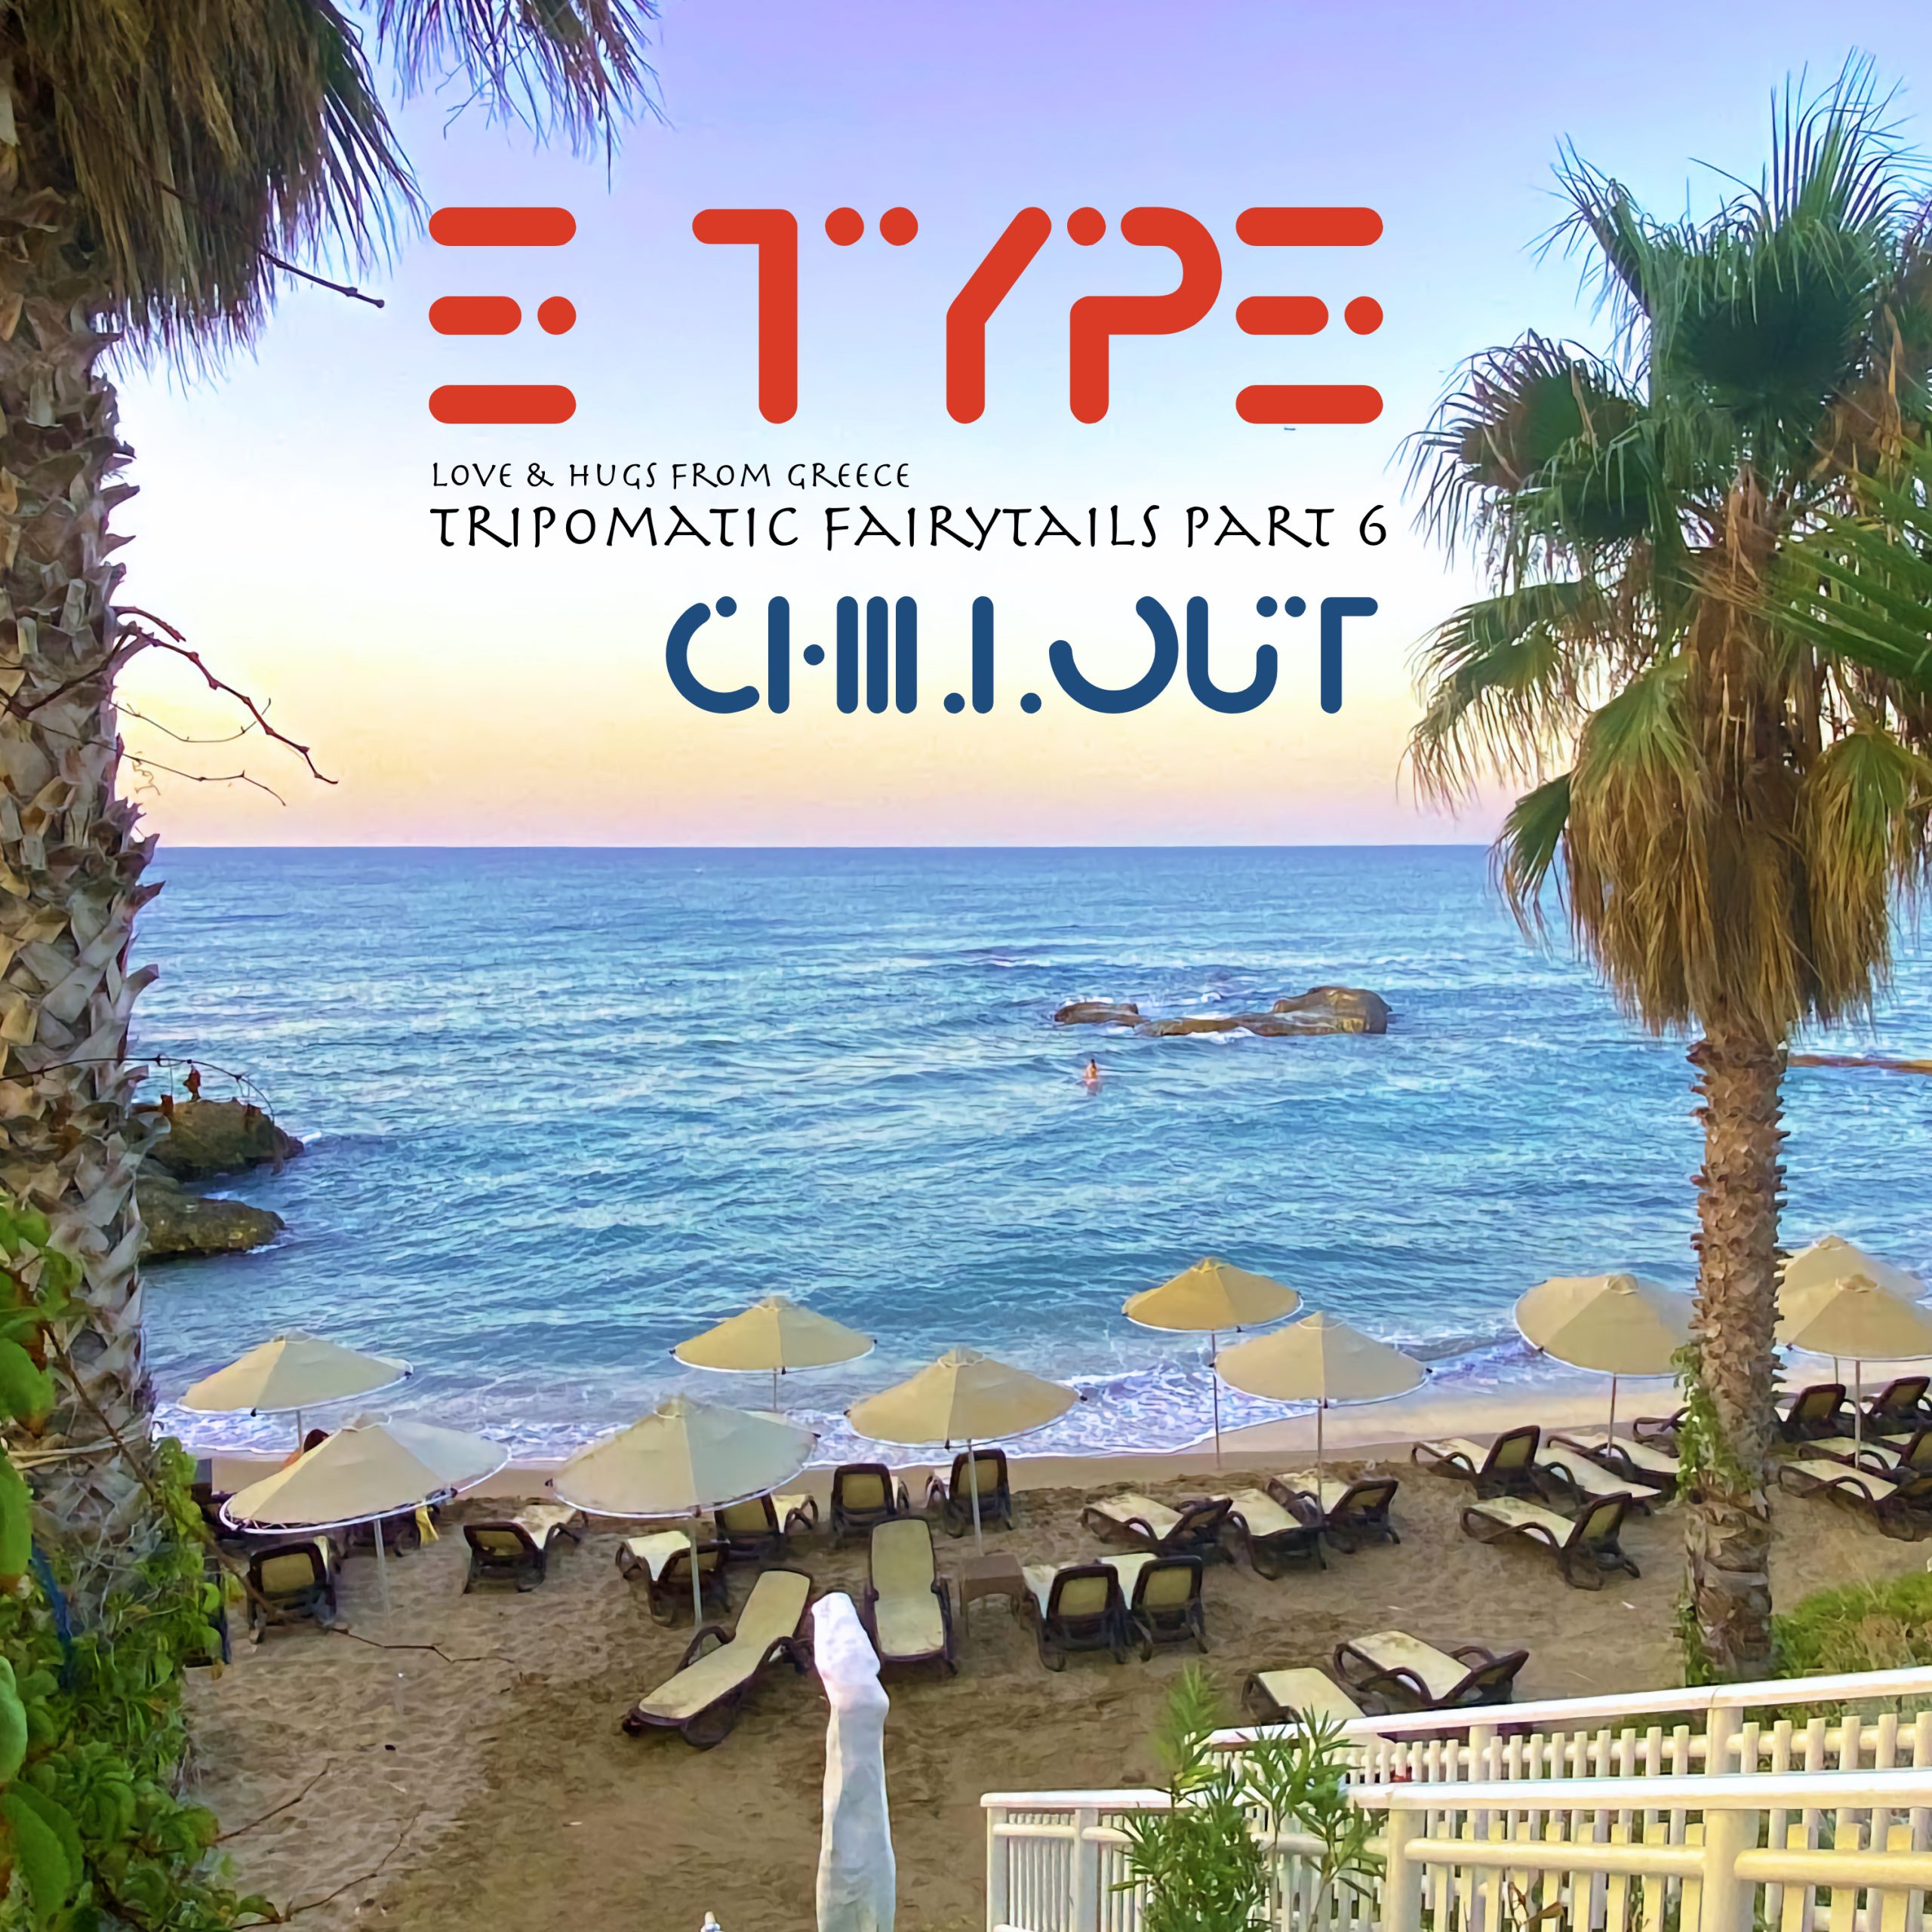 E-TYPE – Chillout – Love & Hugs from Greece – Tripomatic Fairytails Part 6